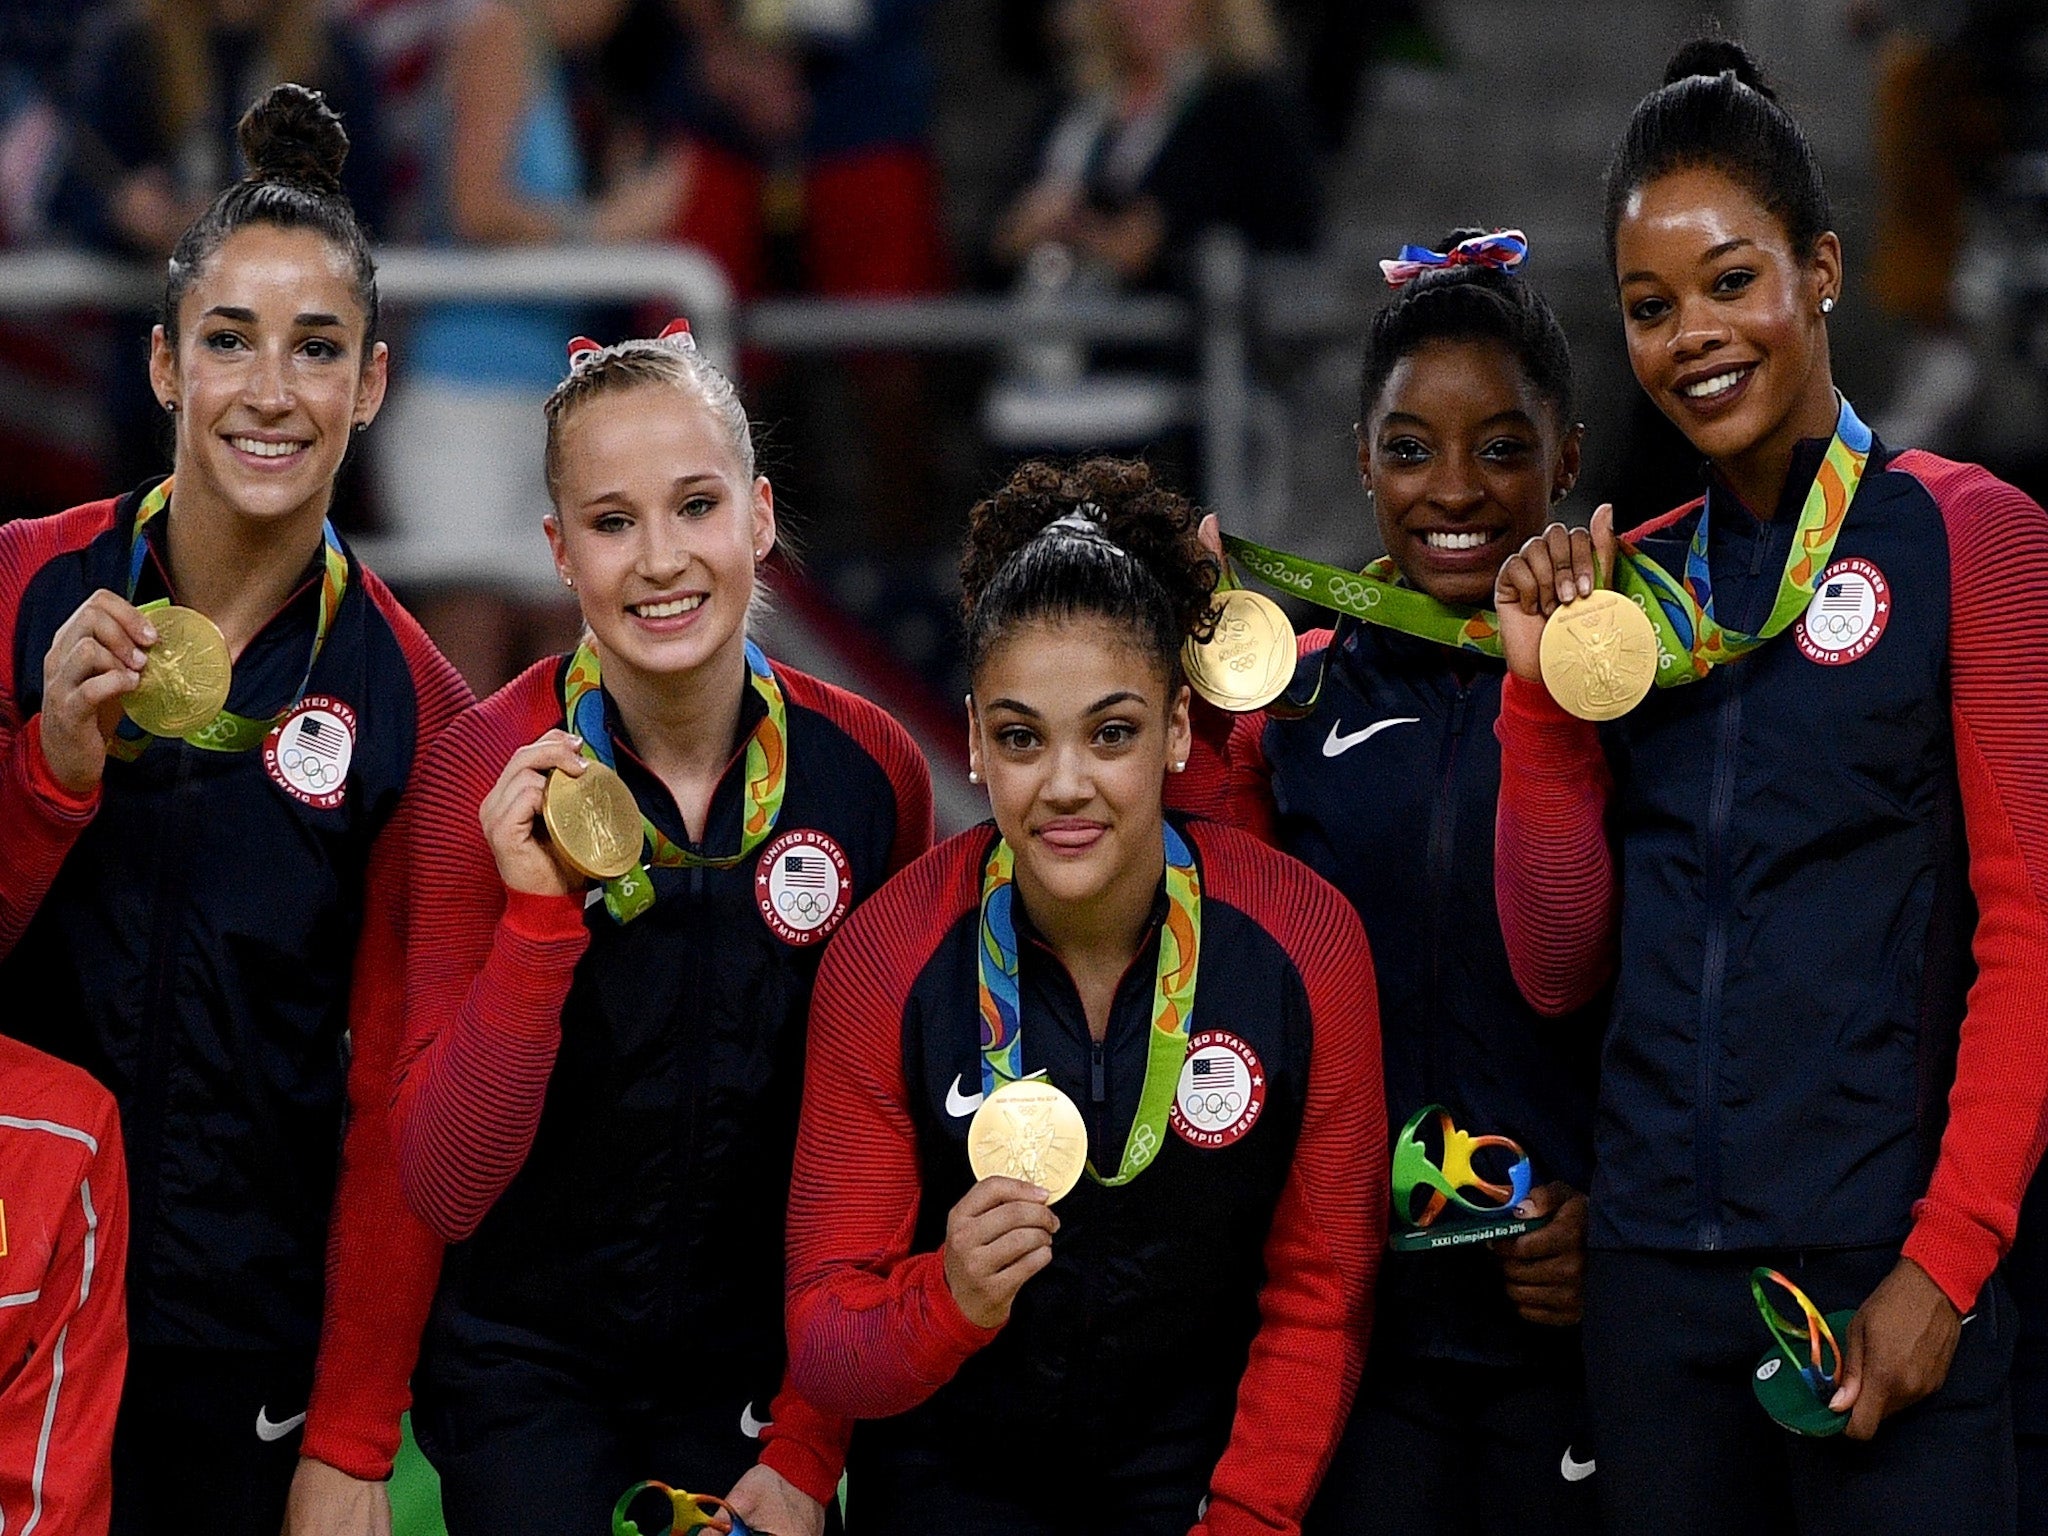 Simone Biles and her United States team-mates show off their gold medals